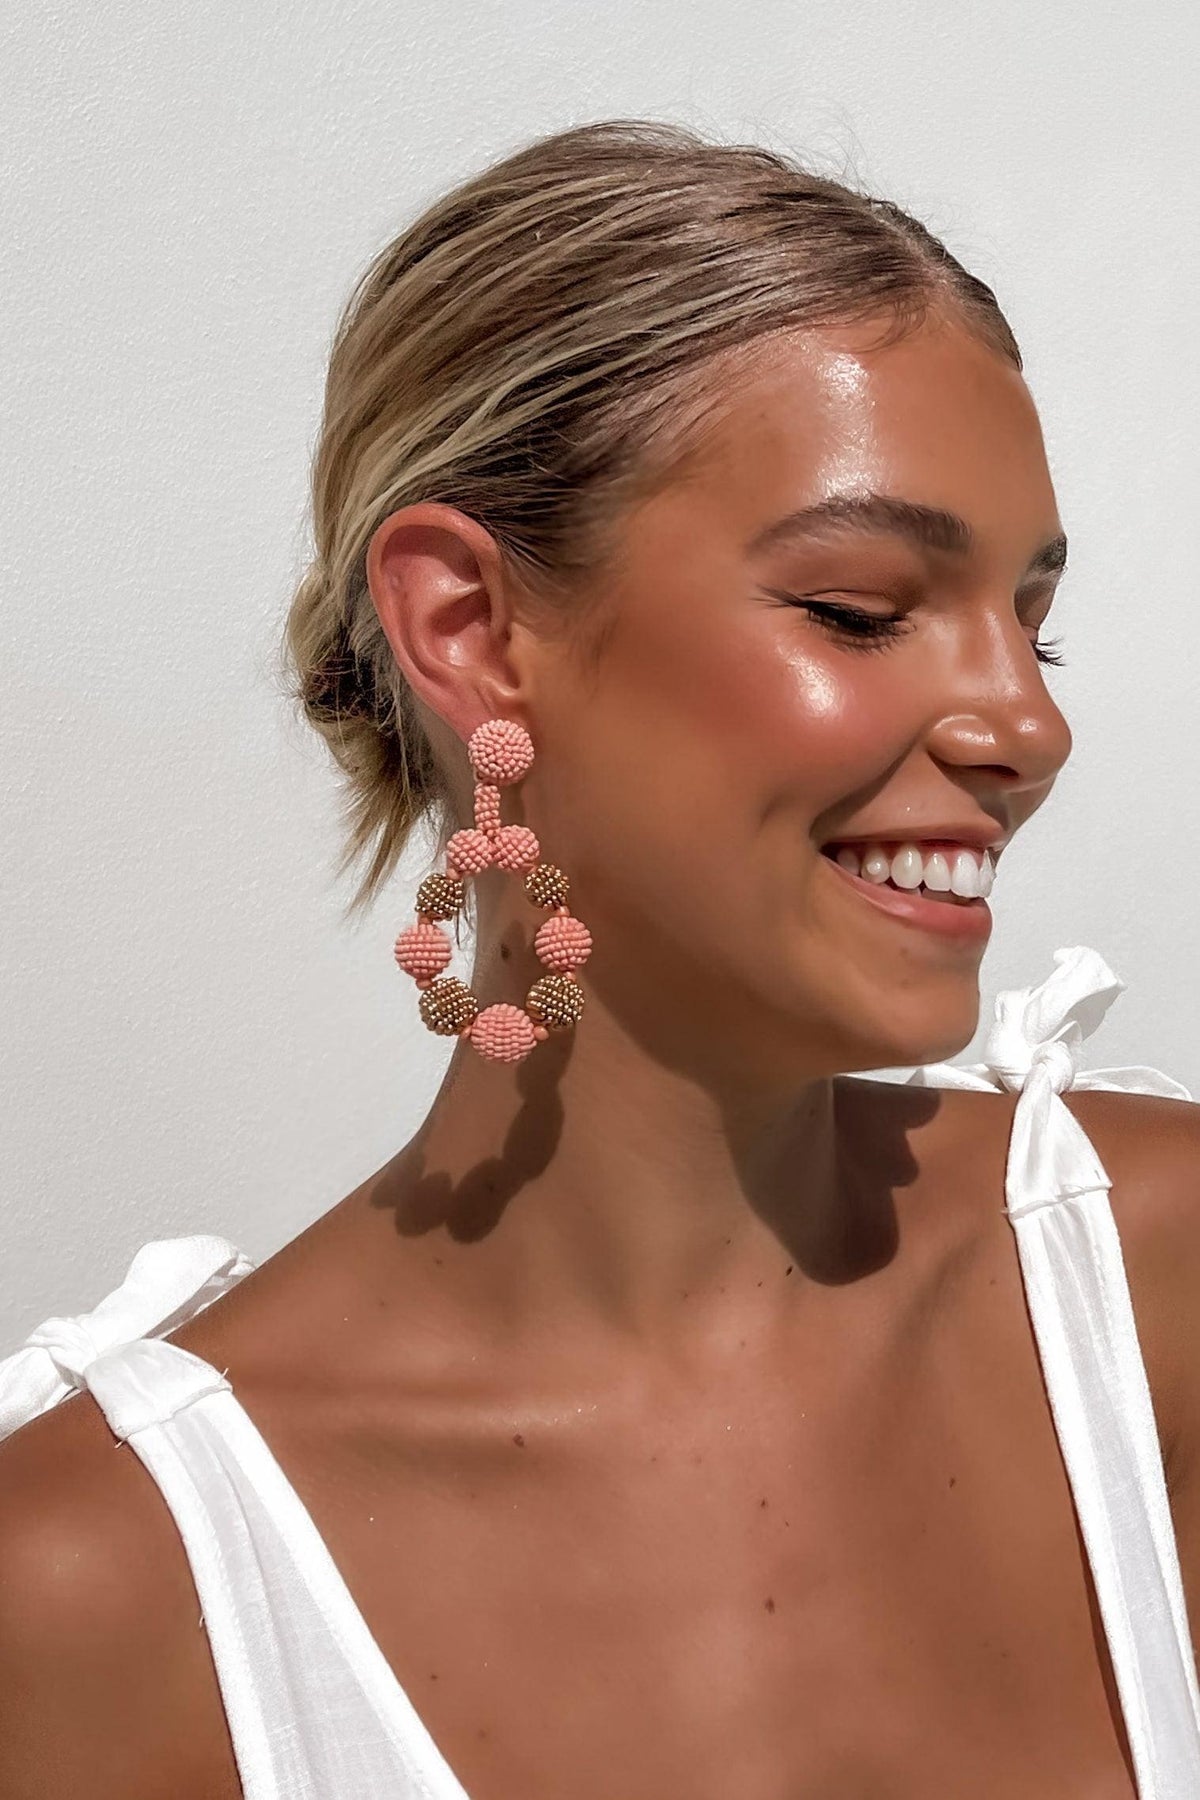 Way Love Goes Earrings, ACCESSORIES, EARRINGS, JEWELLERY, NEW ARRIVALS, PINK, Our New Way Love Goes Earrings Is Now Only $36.00 Exclusive At Mishkah, We Have The Latest Fashion Accessories @ Mishkah Online Fashion Boutique Our New Way Love Goes Earrings is now only $36.00-MISHKAH